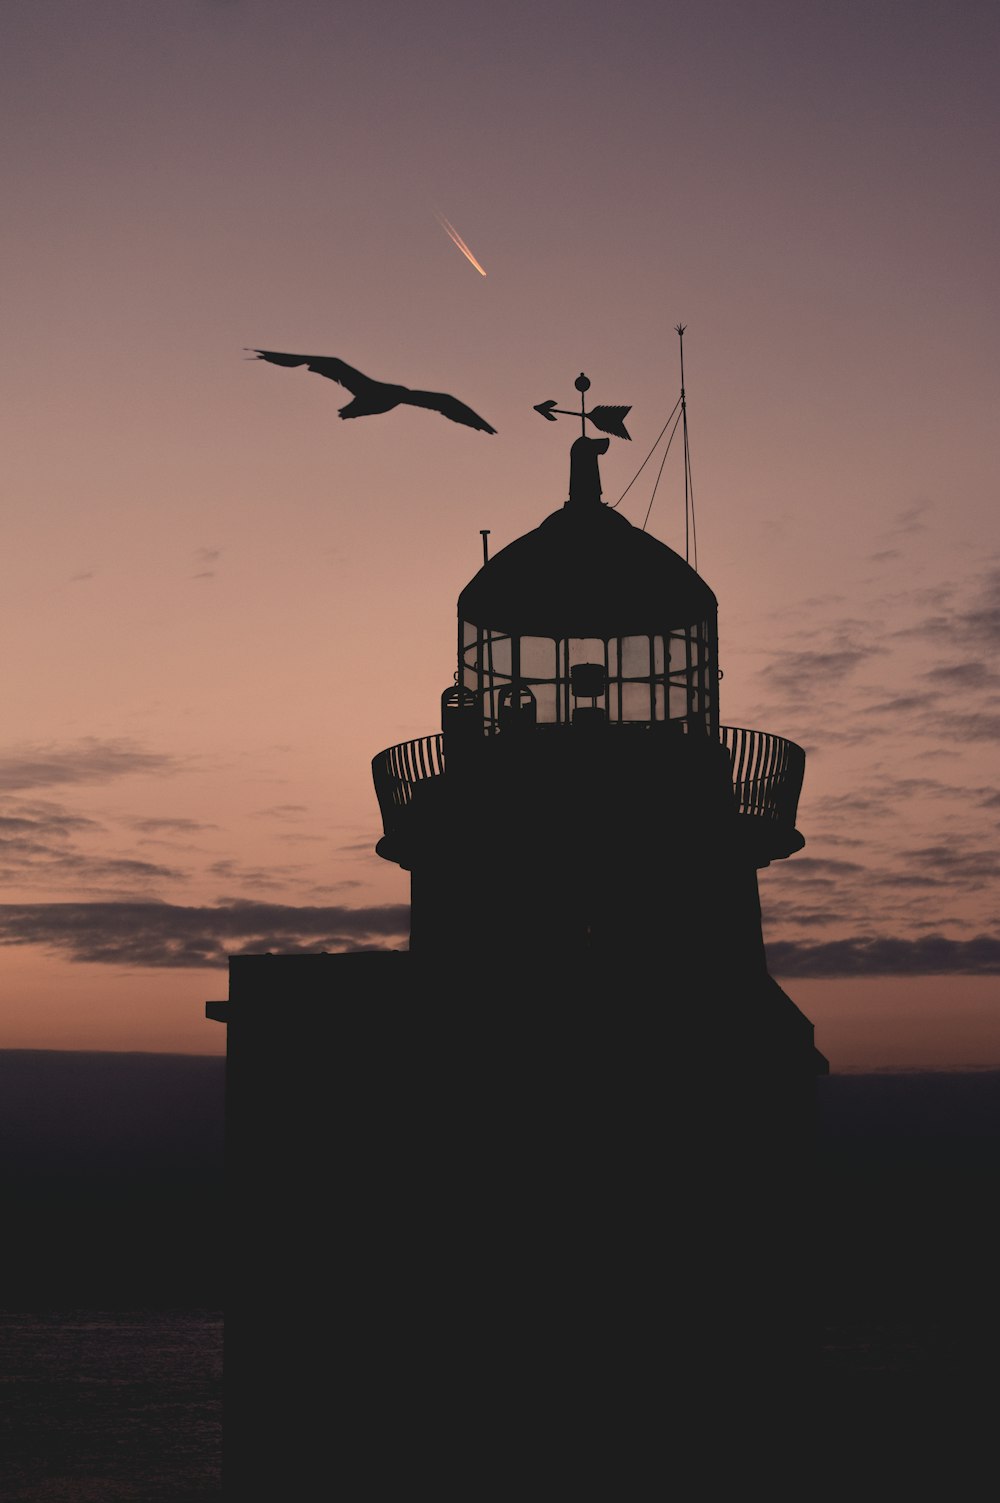 silhouette of bird flying over the building during sunset